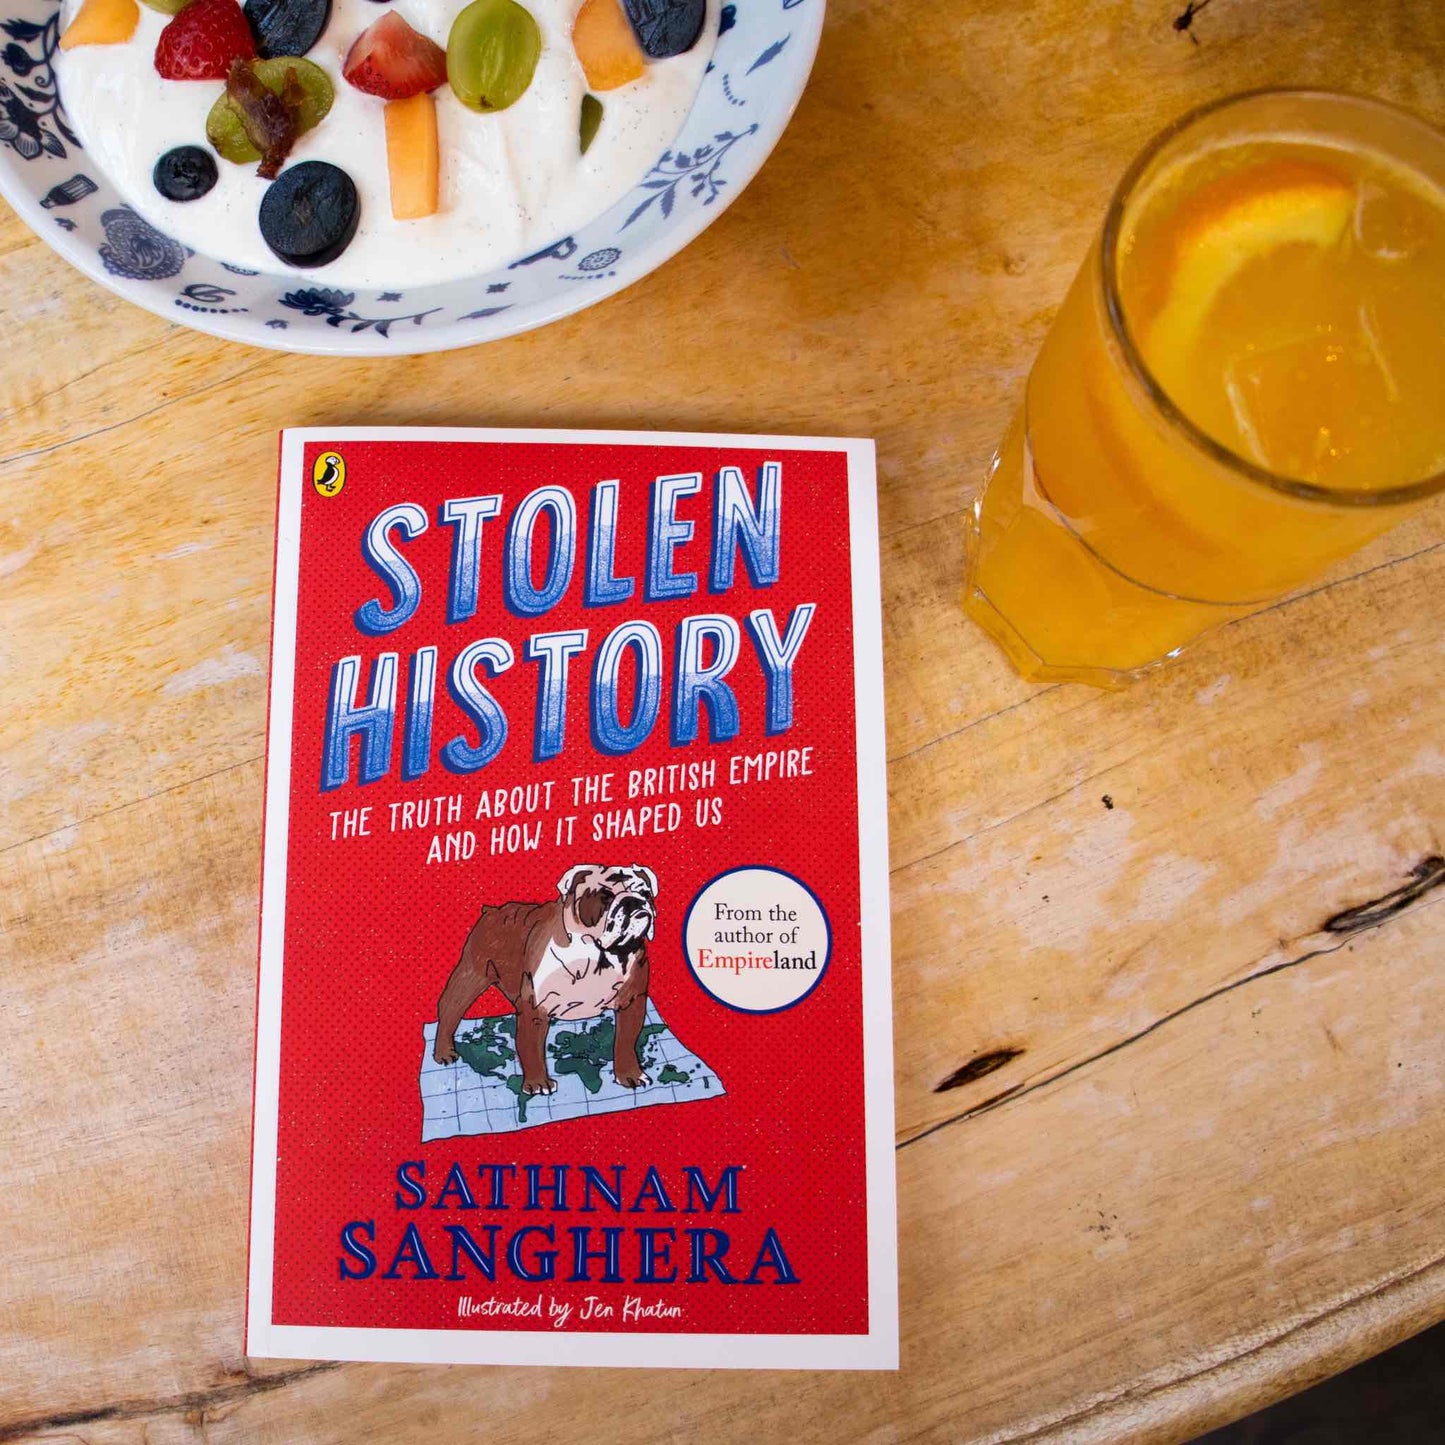 Stolen History: The truth about the British Empire and how it shaped us book by Sathnam Sanghera